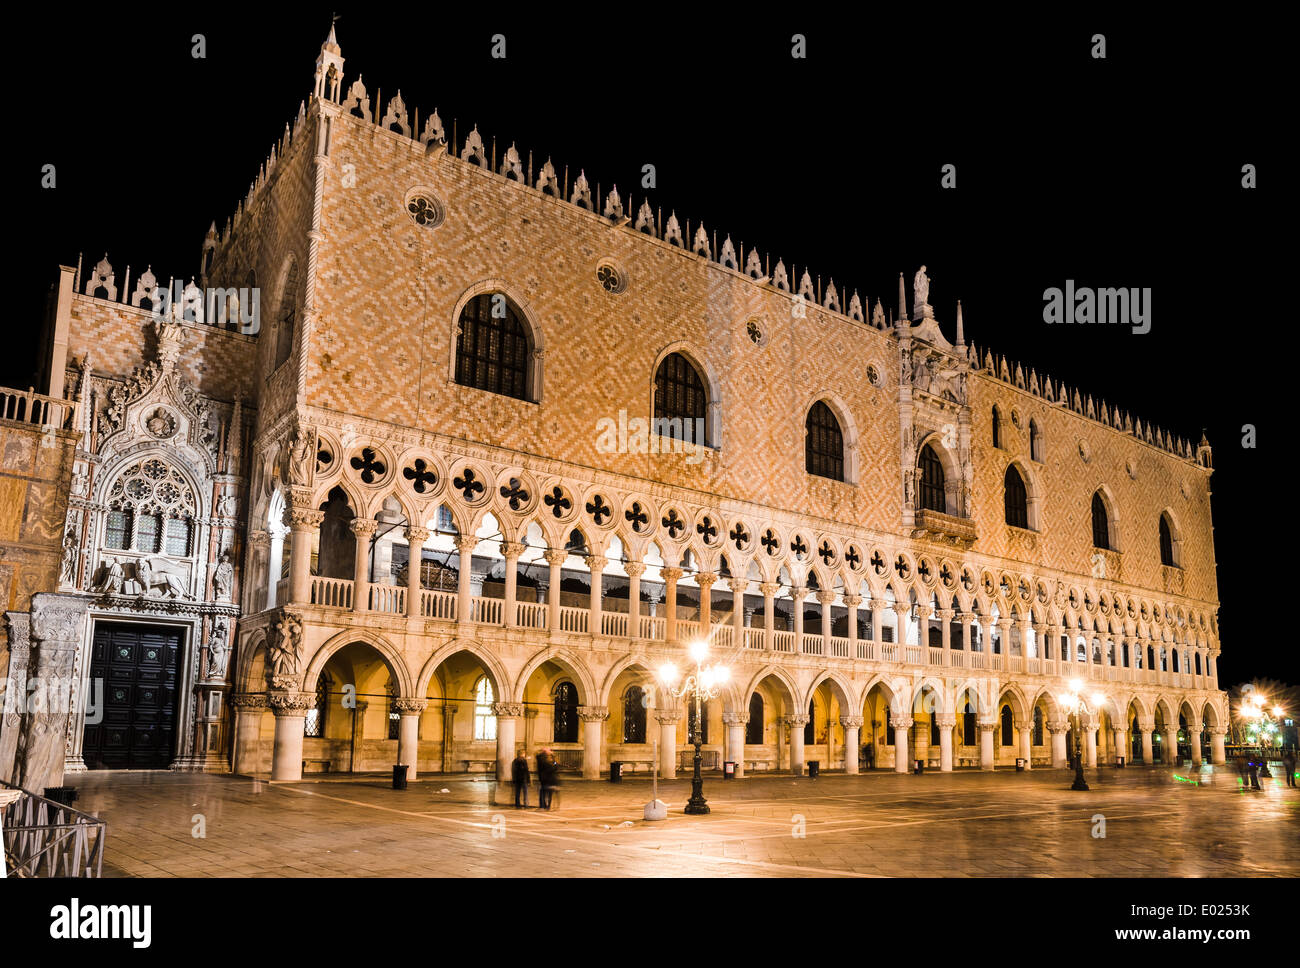 Venice, Italy. Night scene with Palazzo Ducale in Piazza San Marco, built in Venetian Gothic style, italian culture landmark Stock Photo